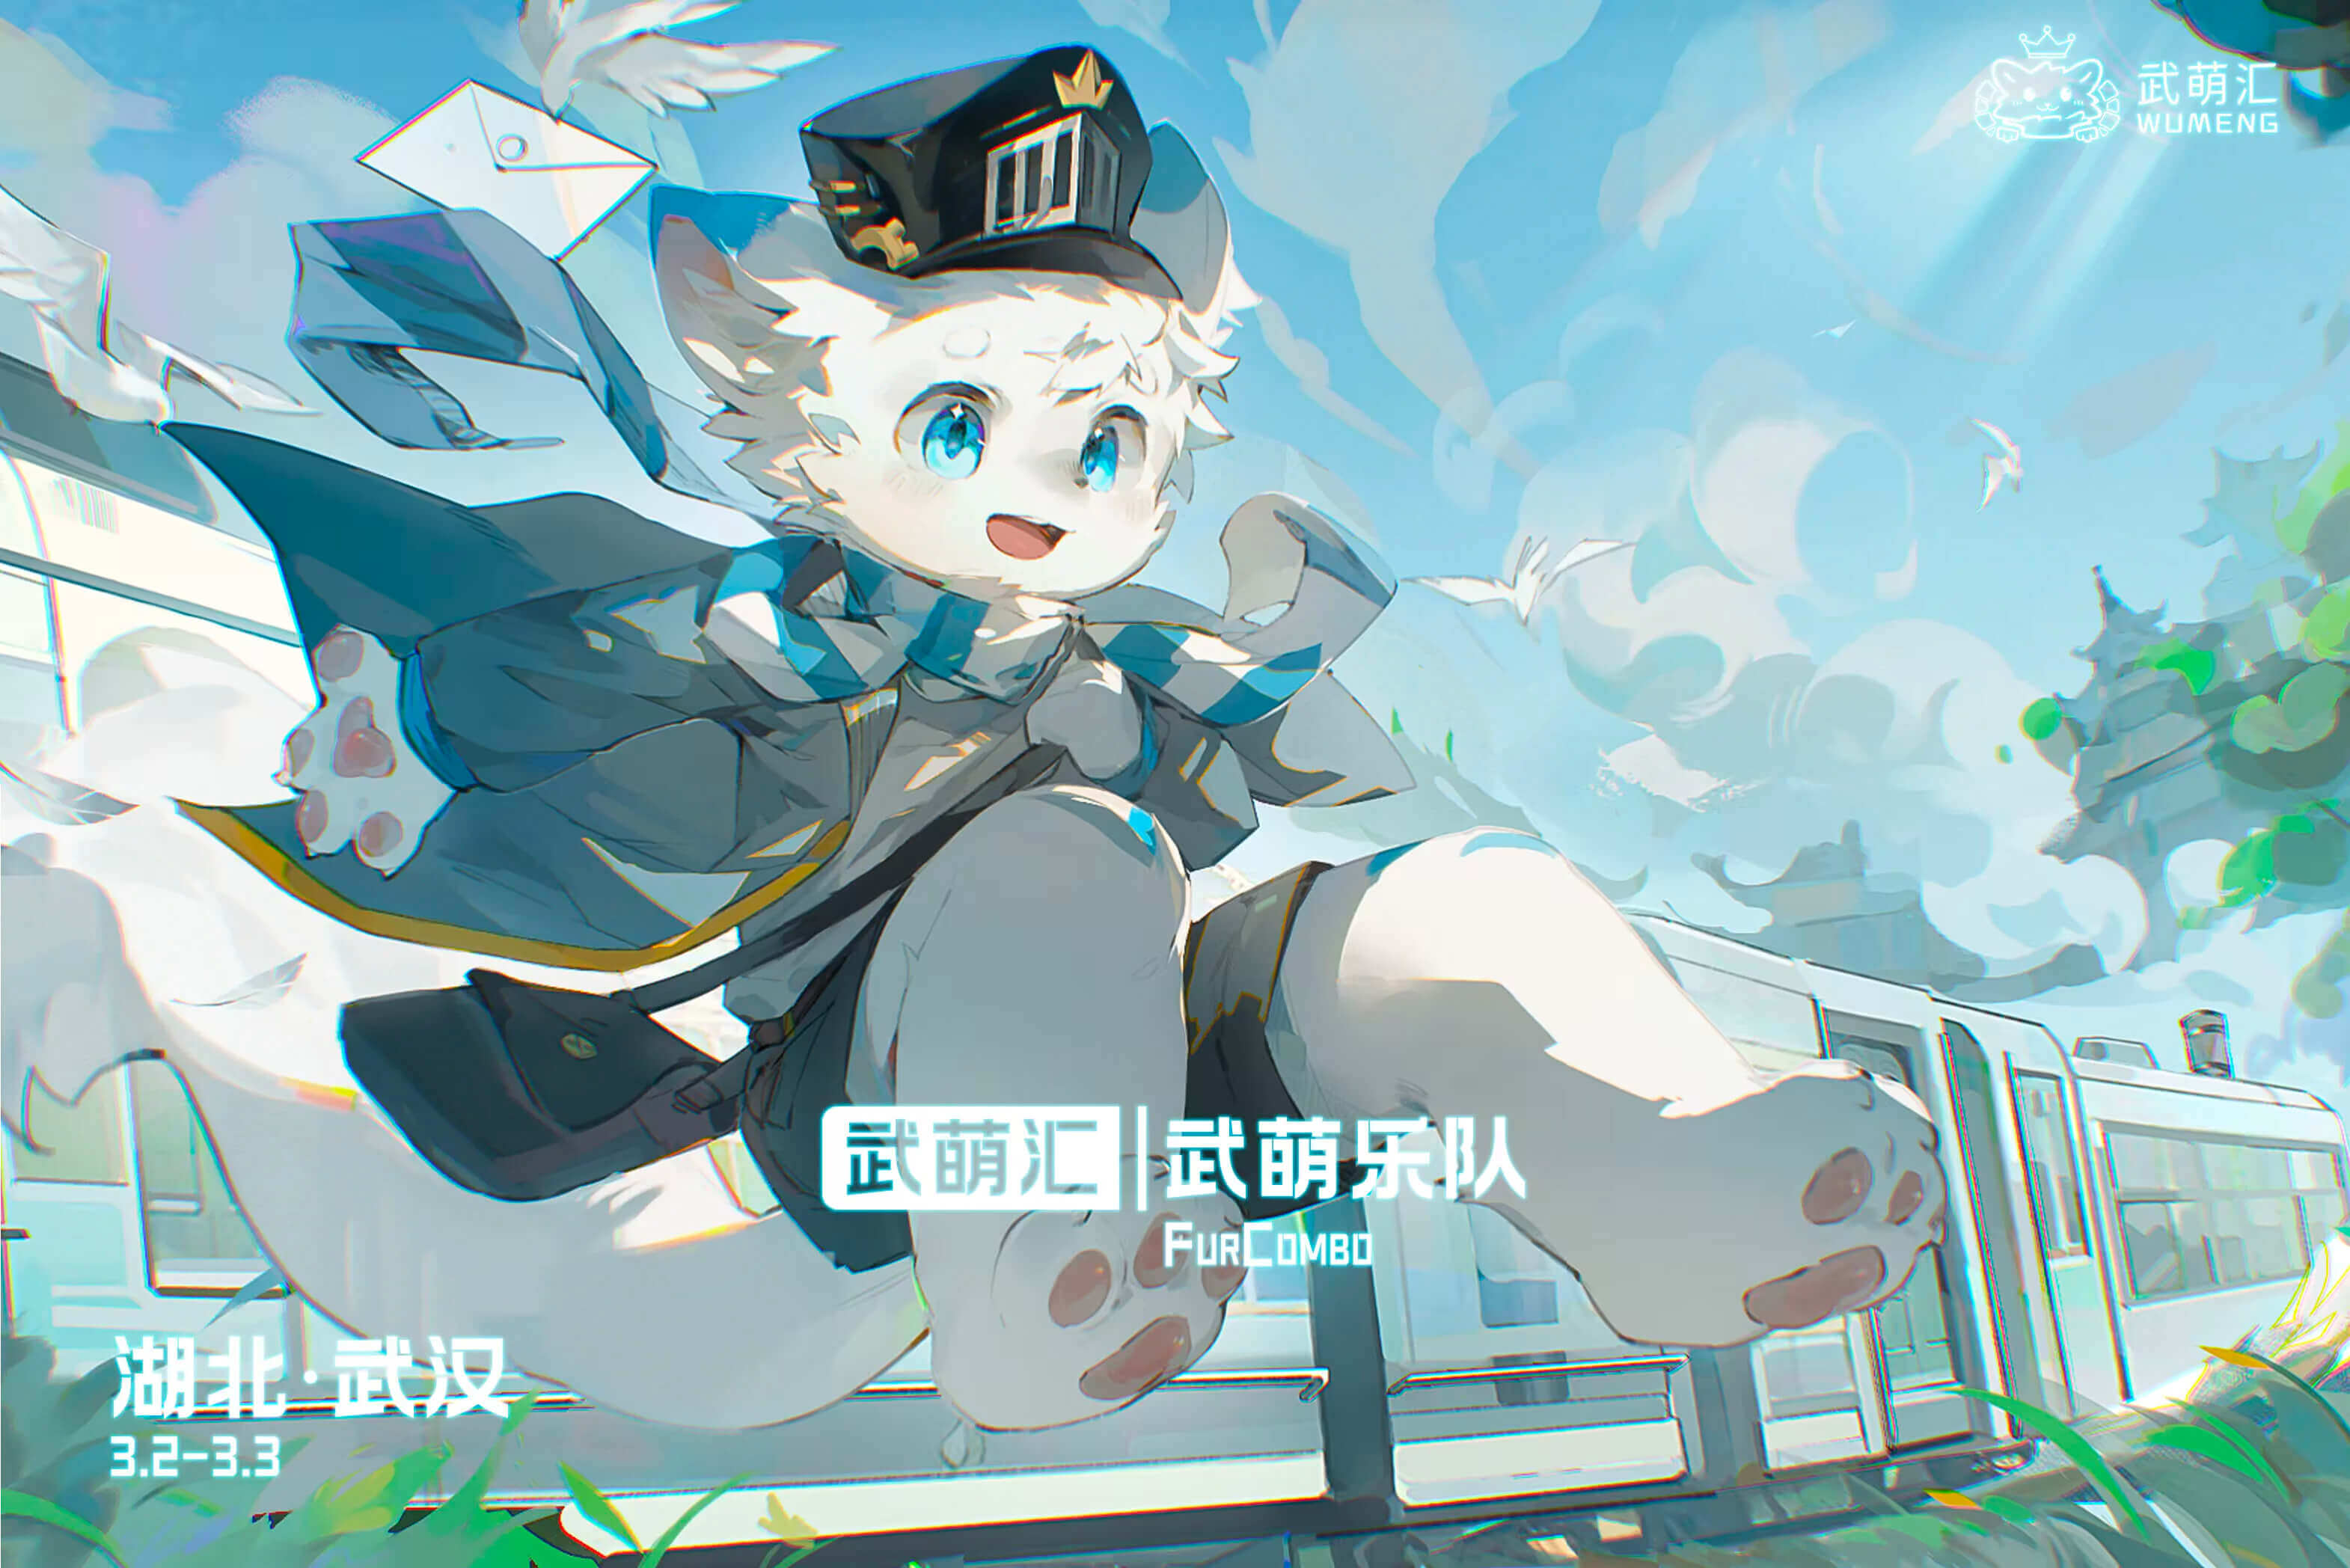 Event cover of FurCombo武萌汇